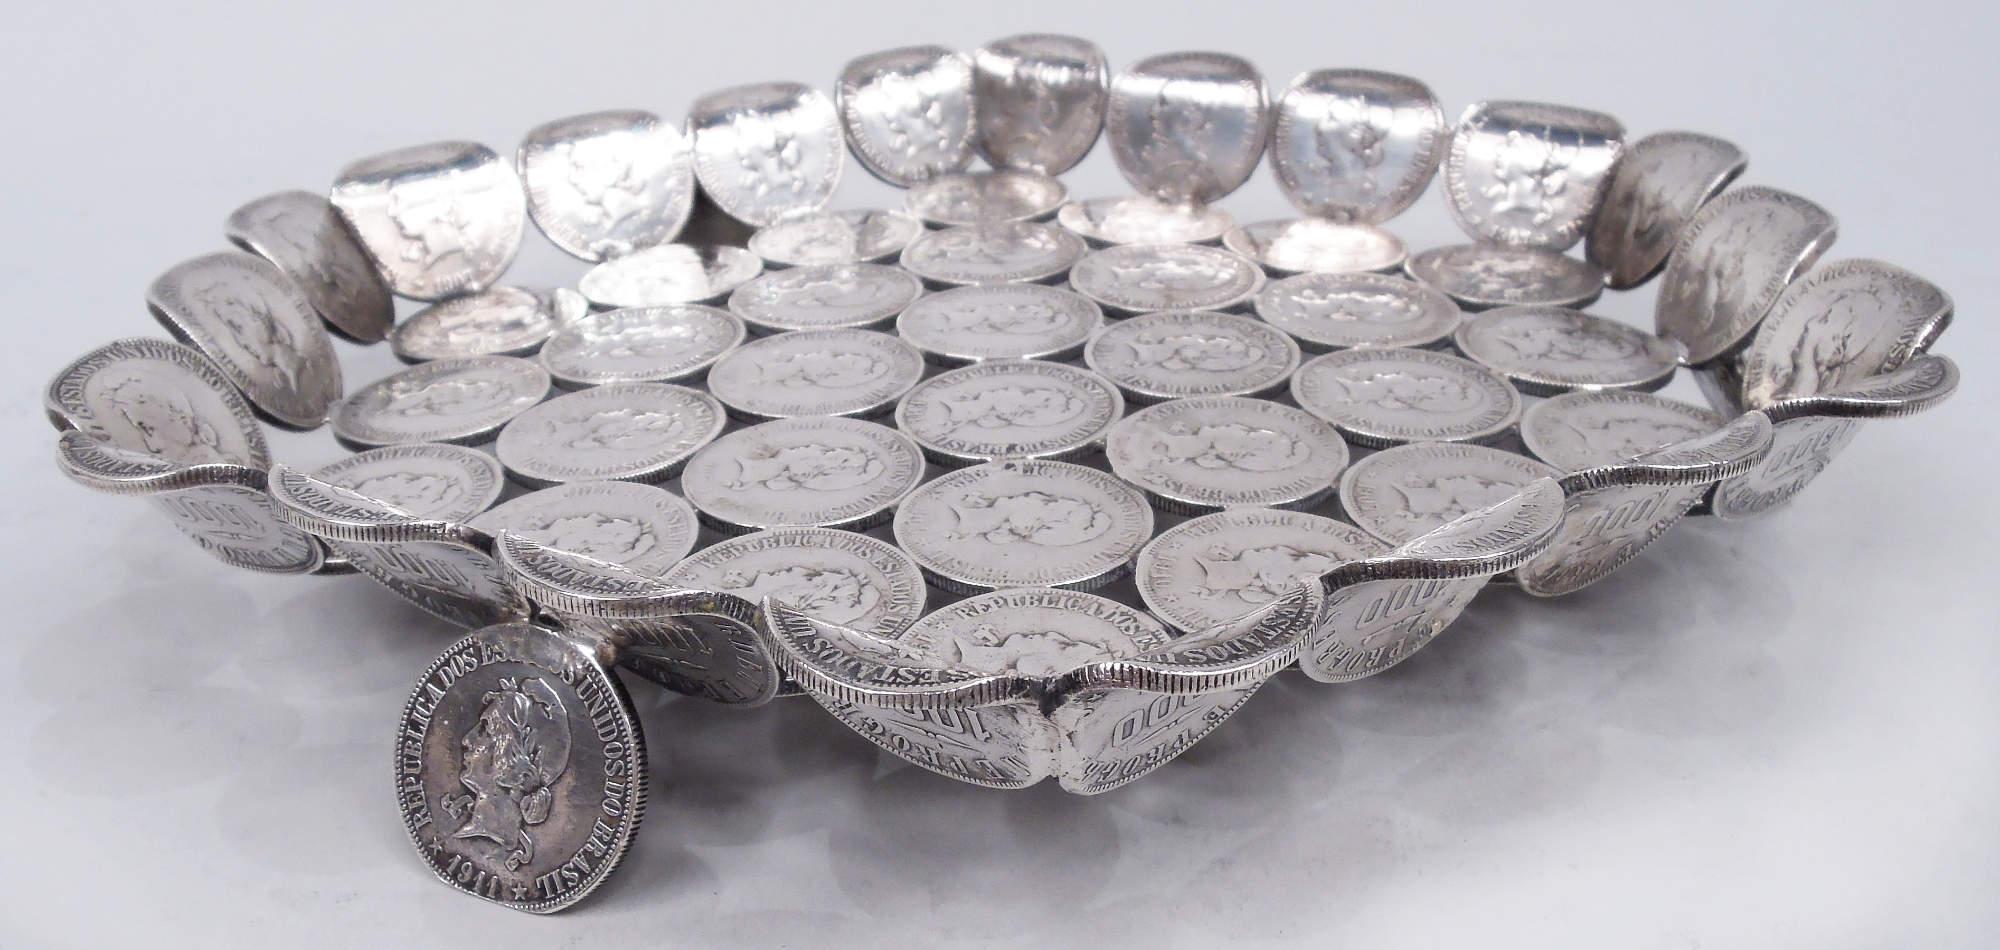 South American dish, ca 1920. Lozenge-form with flared rim and 3 splayed supports comprising Brazilian 1000 Reis coins minted in the first two decades of the twentieth century. A great way to give “currency” to your décor. Weight: 17 troy ounces. 